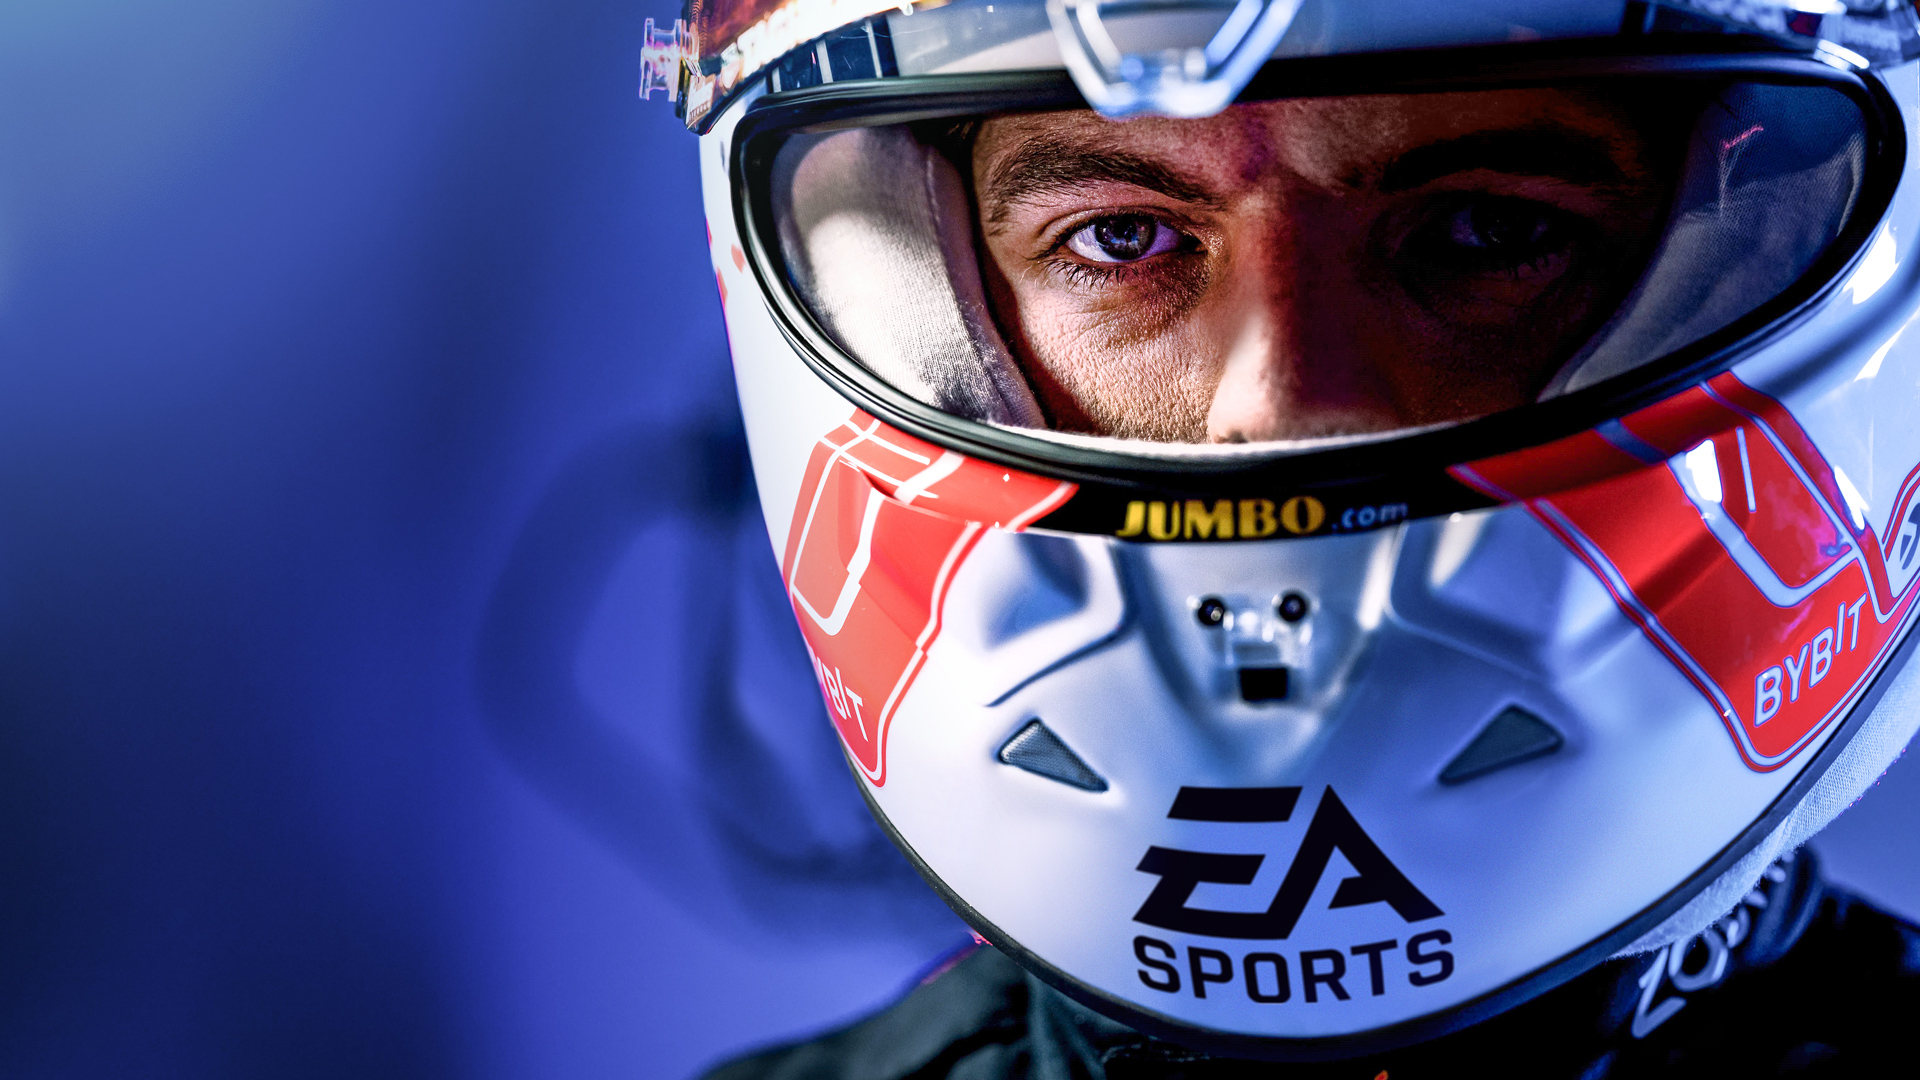 F1 Champ Max Verstappen Signs With EA Sports